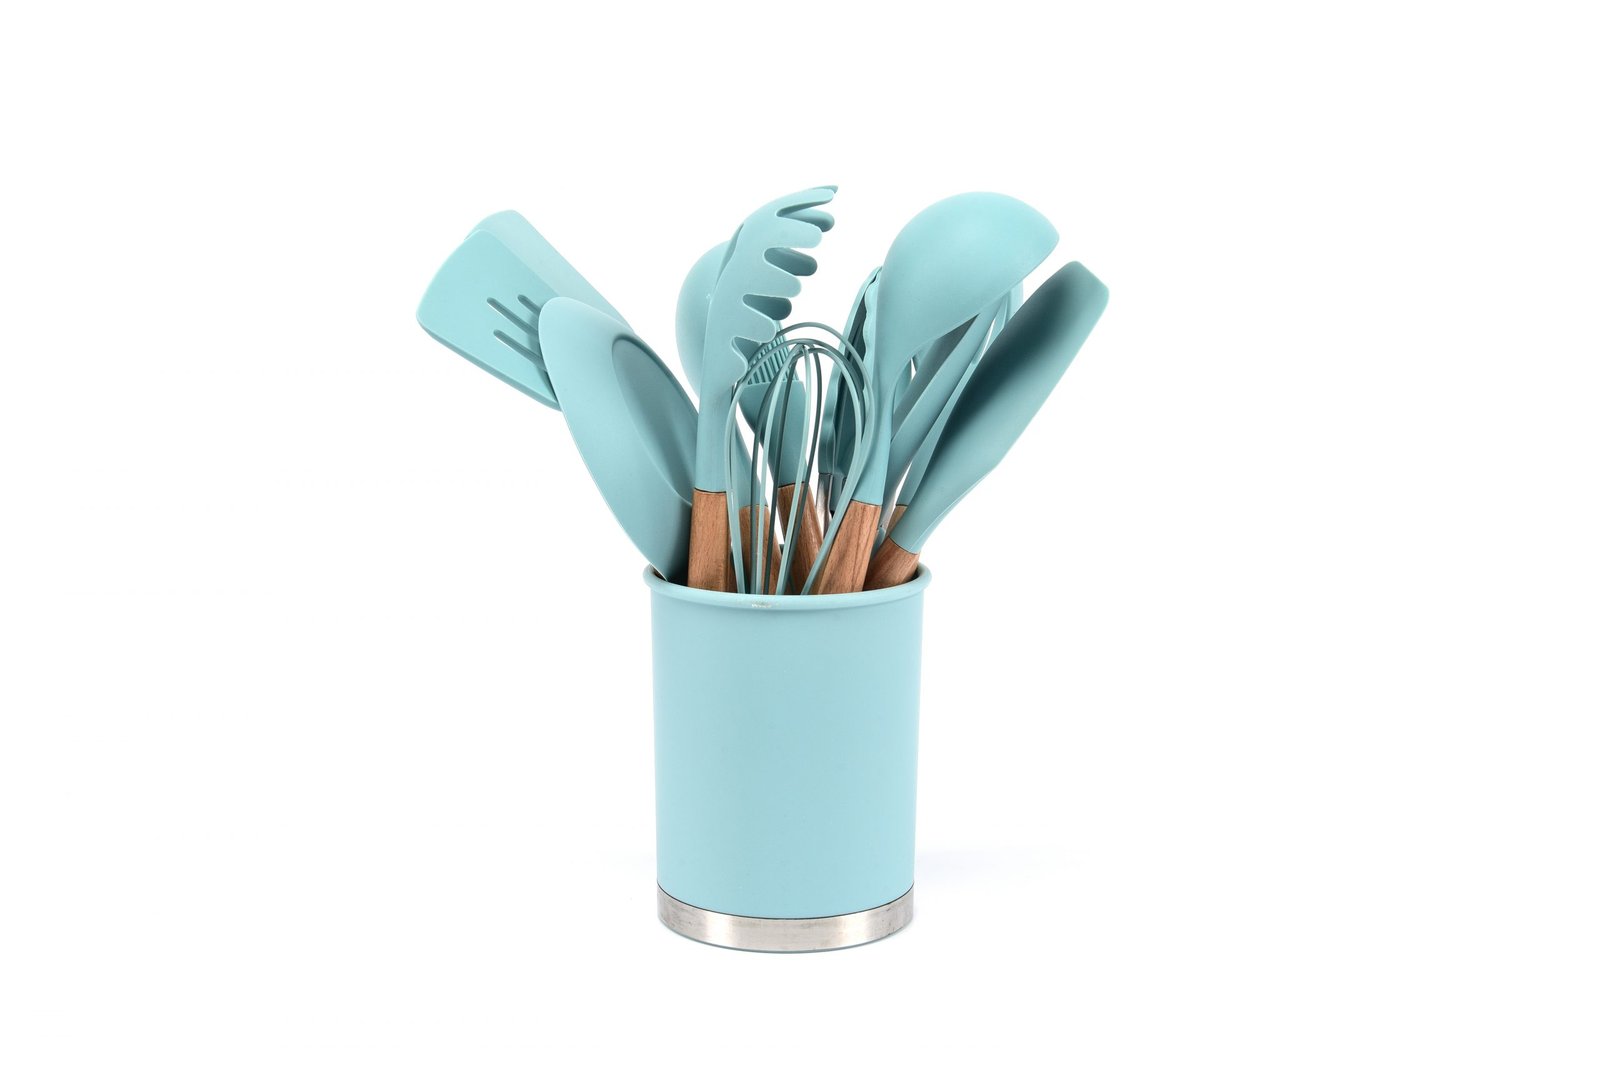 https://www.wetopsilicone.com/wp-content/uploads/2021/04/Wholesale-Silicone-Cooking-Utensils-Set-Heat-Resistant-4-scaled.jpg